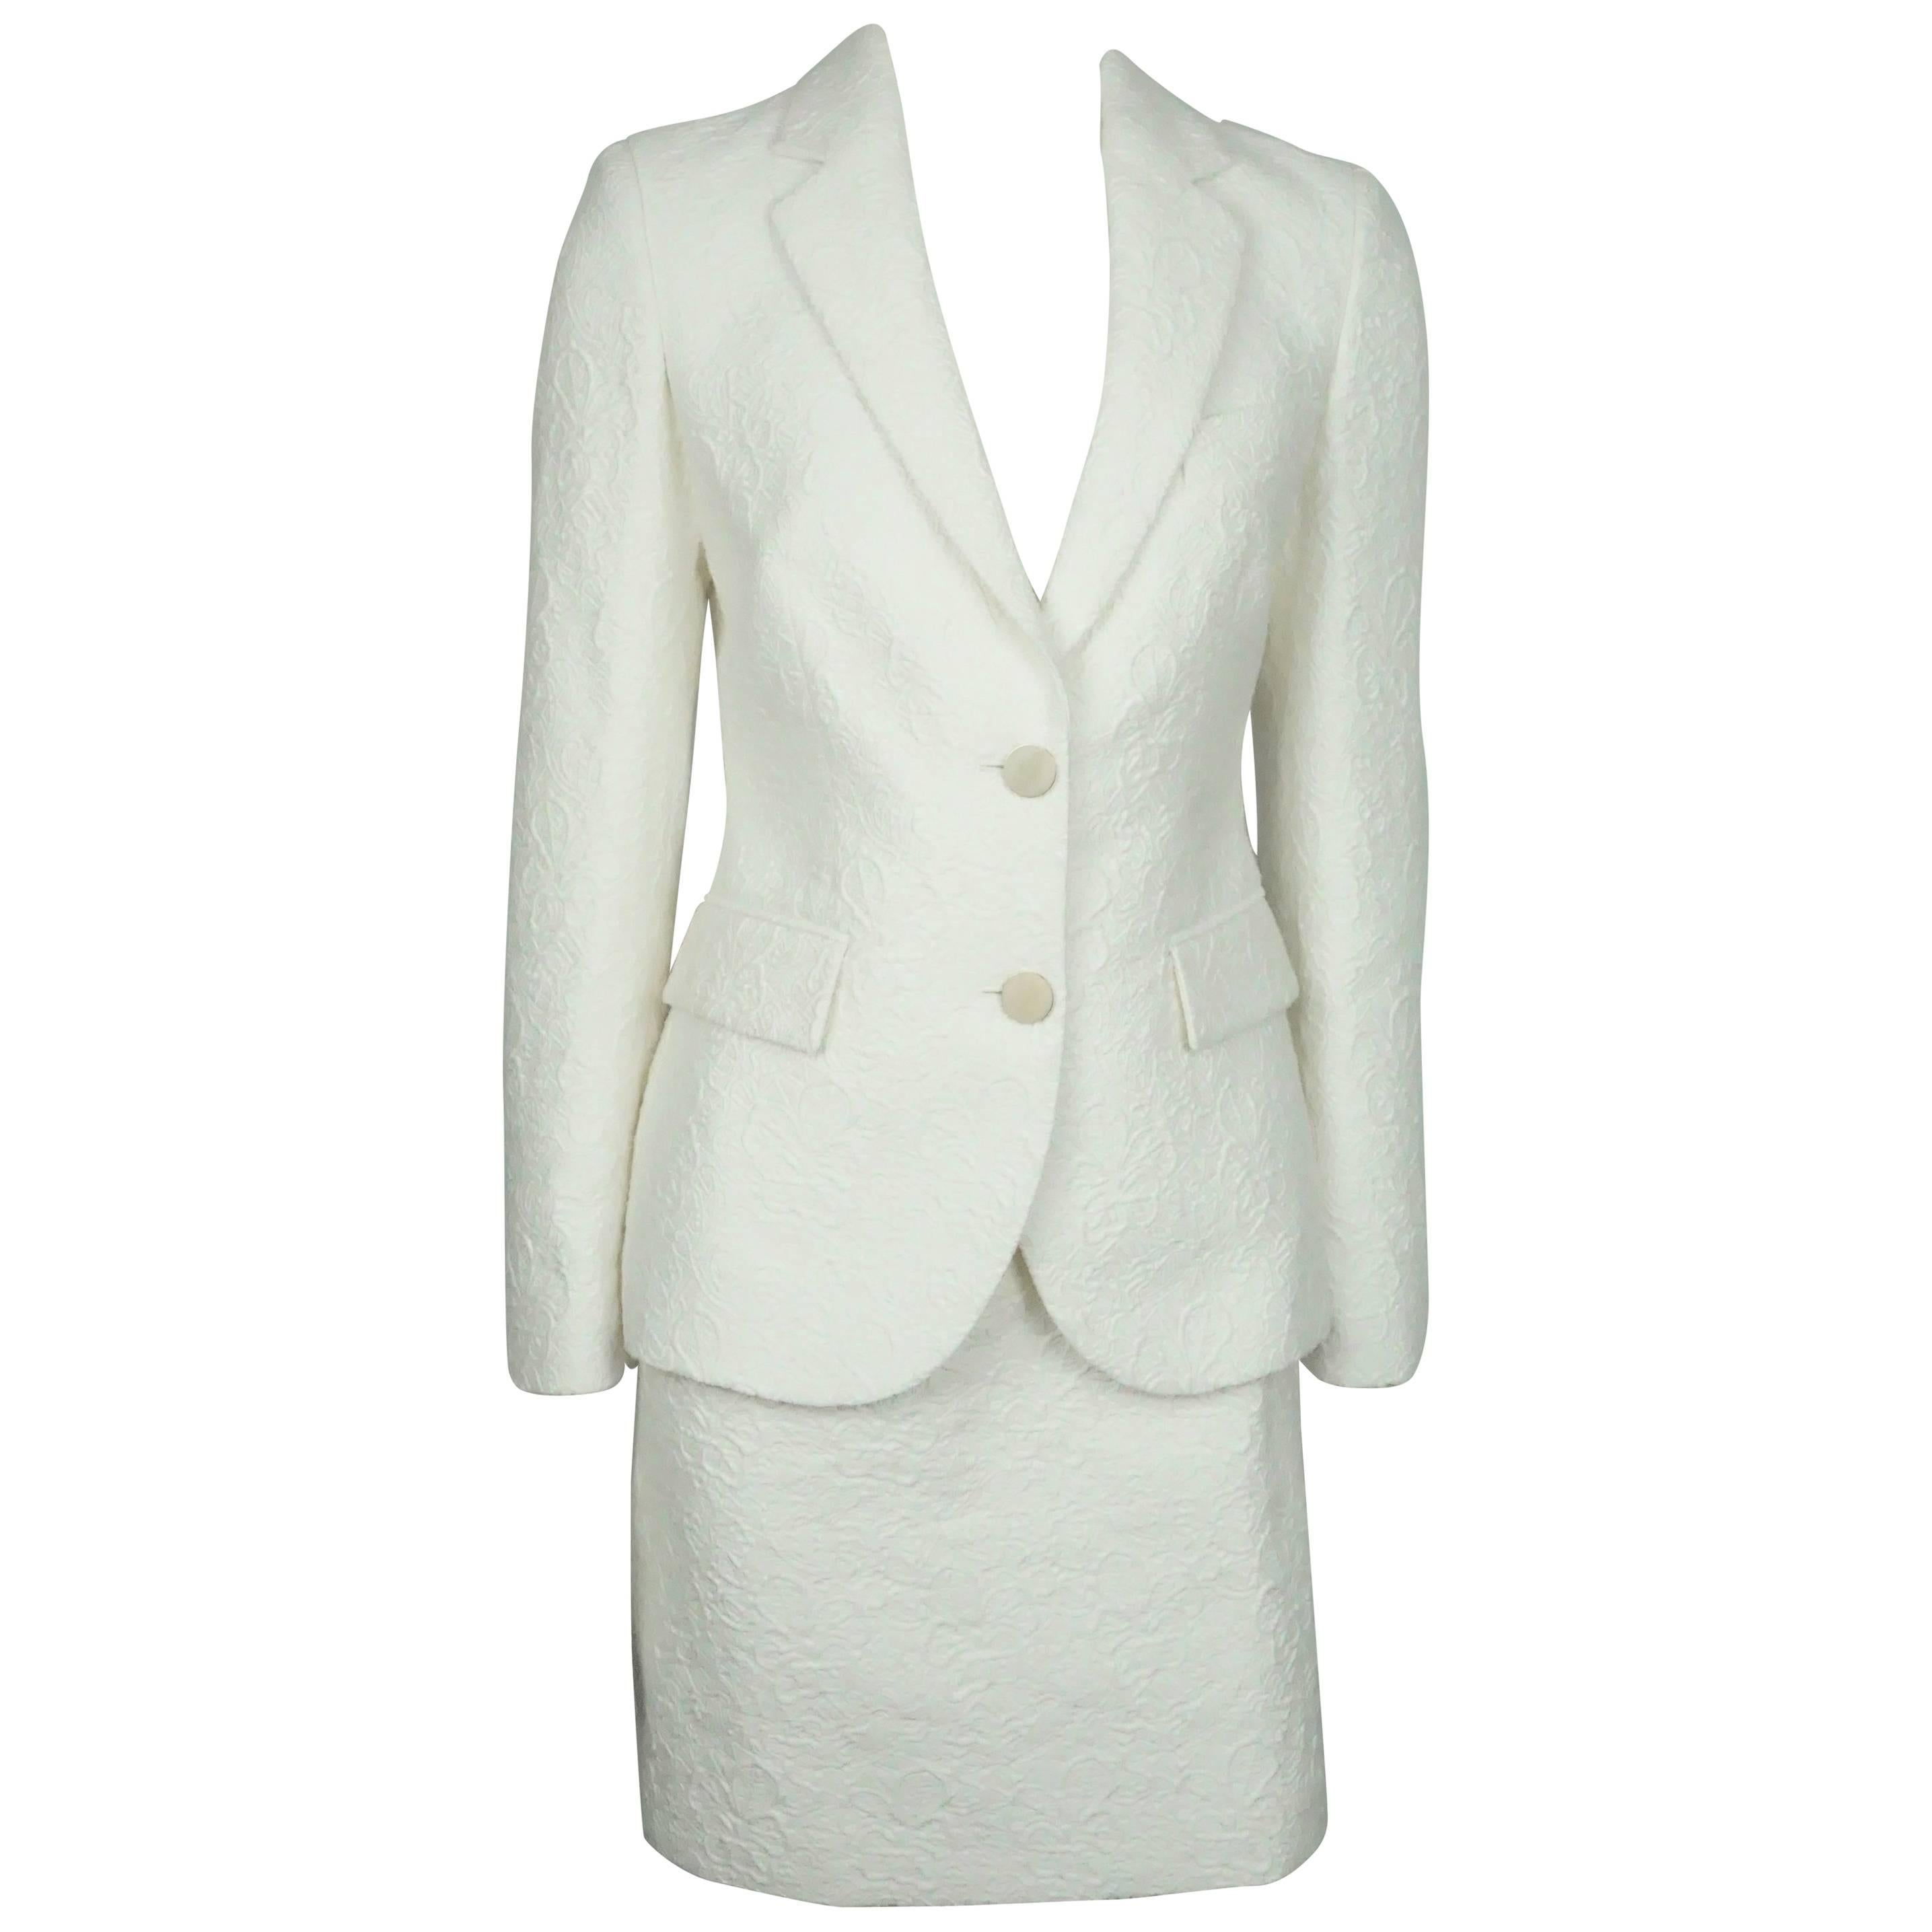 Emilio Pucci Ivory Textured Cotton and Silk Jacket and Skirt   For Sale